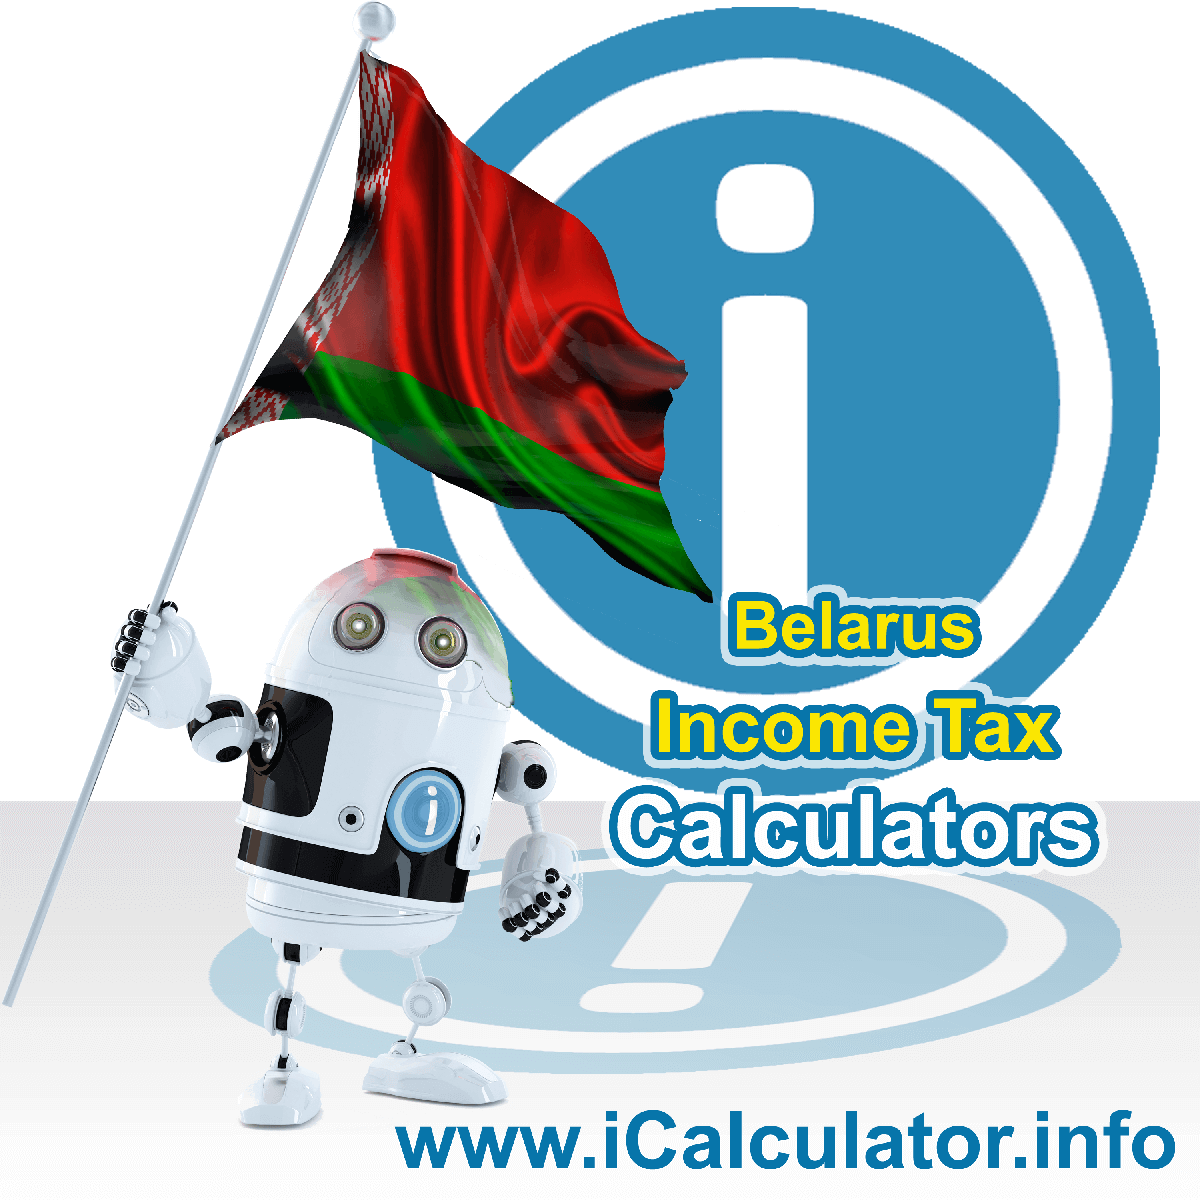 Belarus Income Tax Calculator. This image shows a new employer in Belarus calculating the annual payroll costs based on multiple payroll payments in one year in Belarus using the Belarus income tax calculator to understand their payroll costs in Belarus in 2022